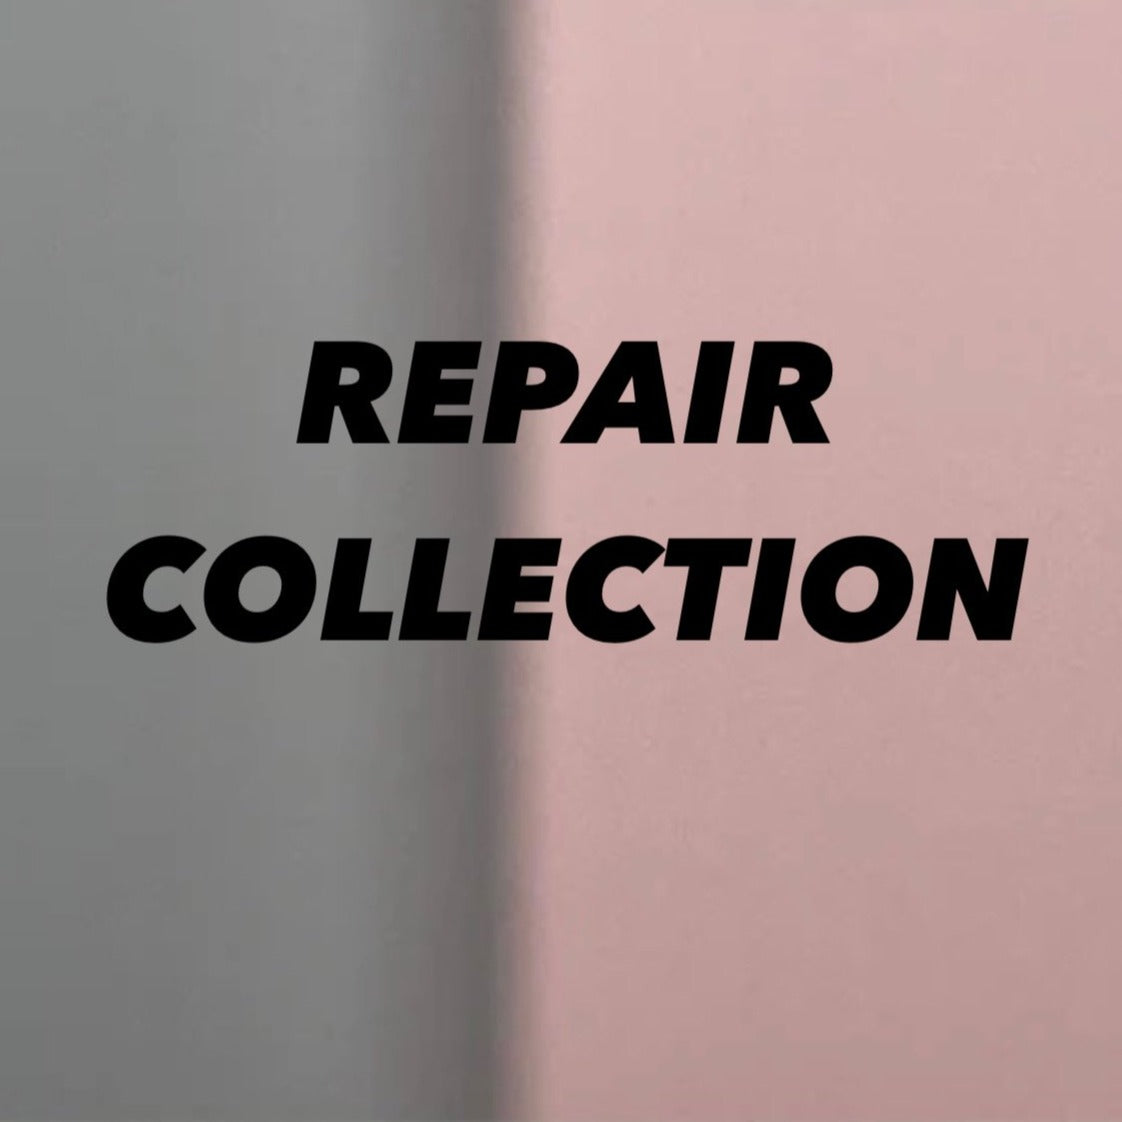 Repair Collection - Hallmark Jewellers Formby & The Jewellers Bench Widnes